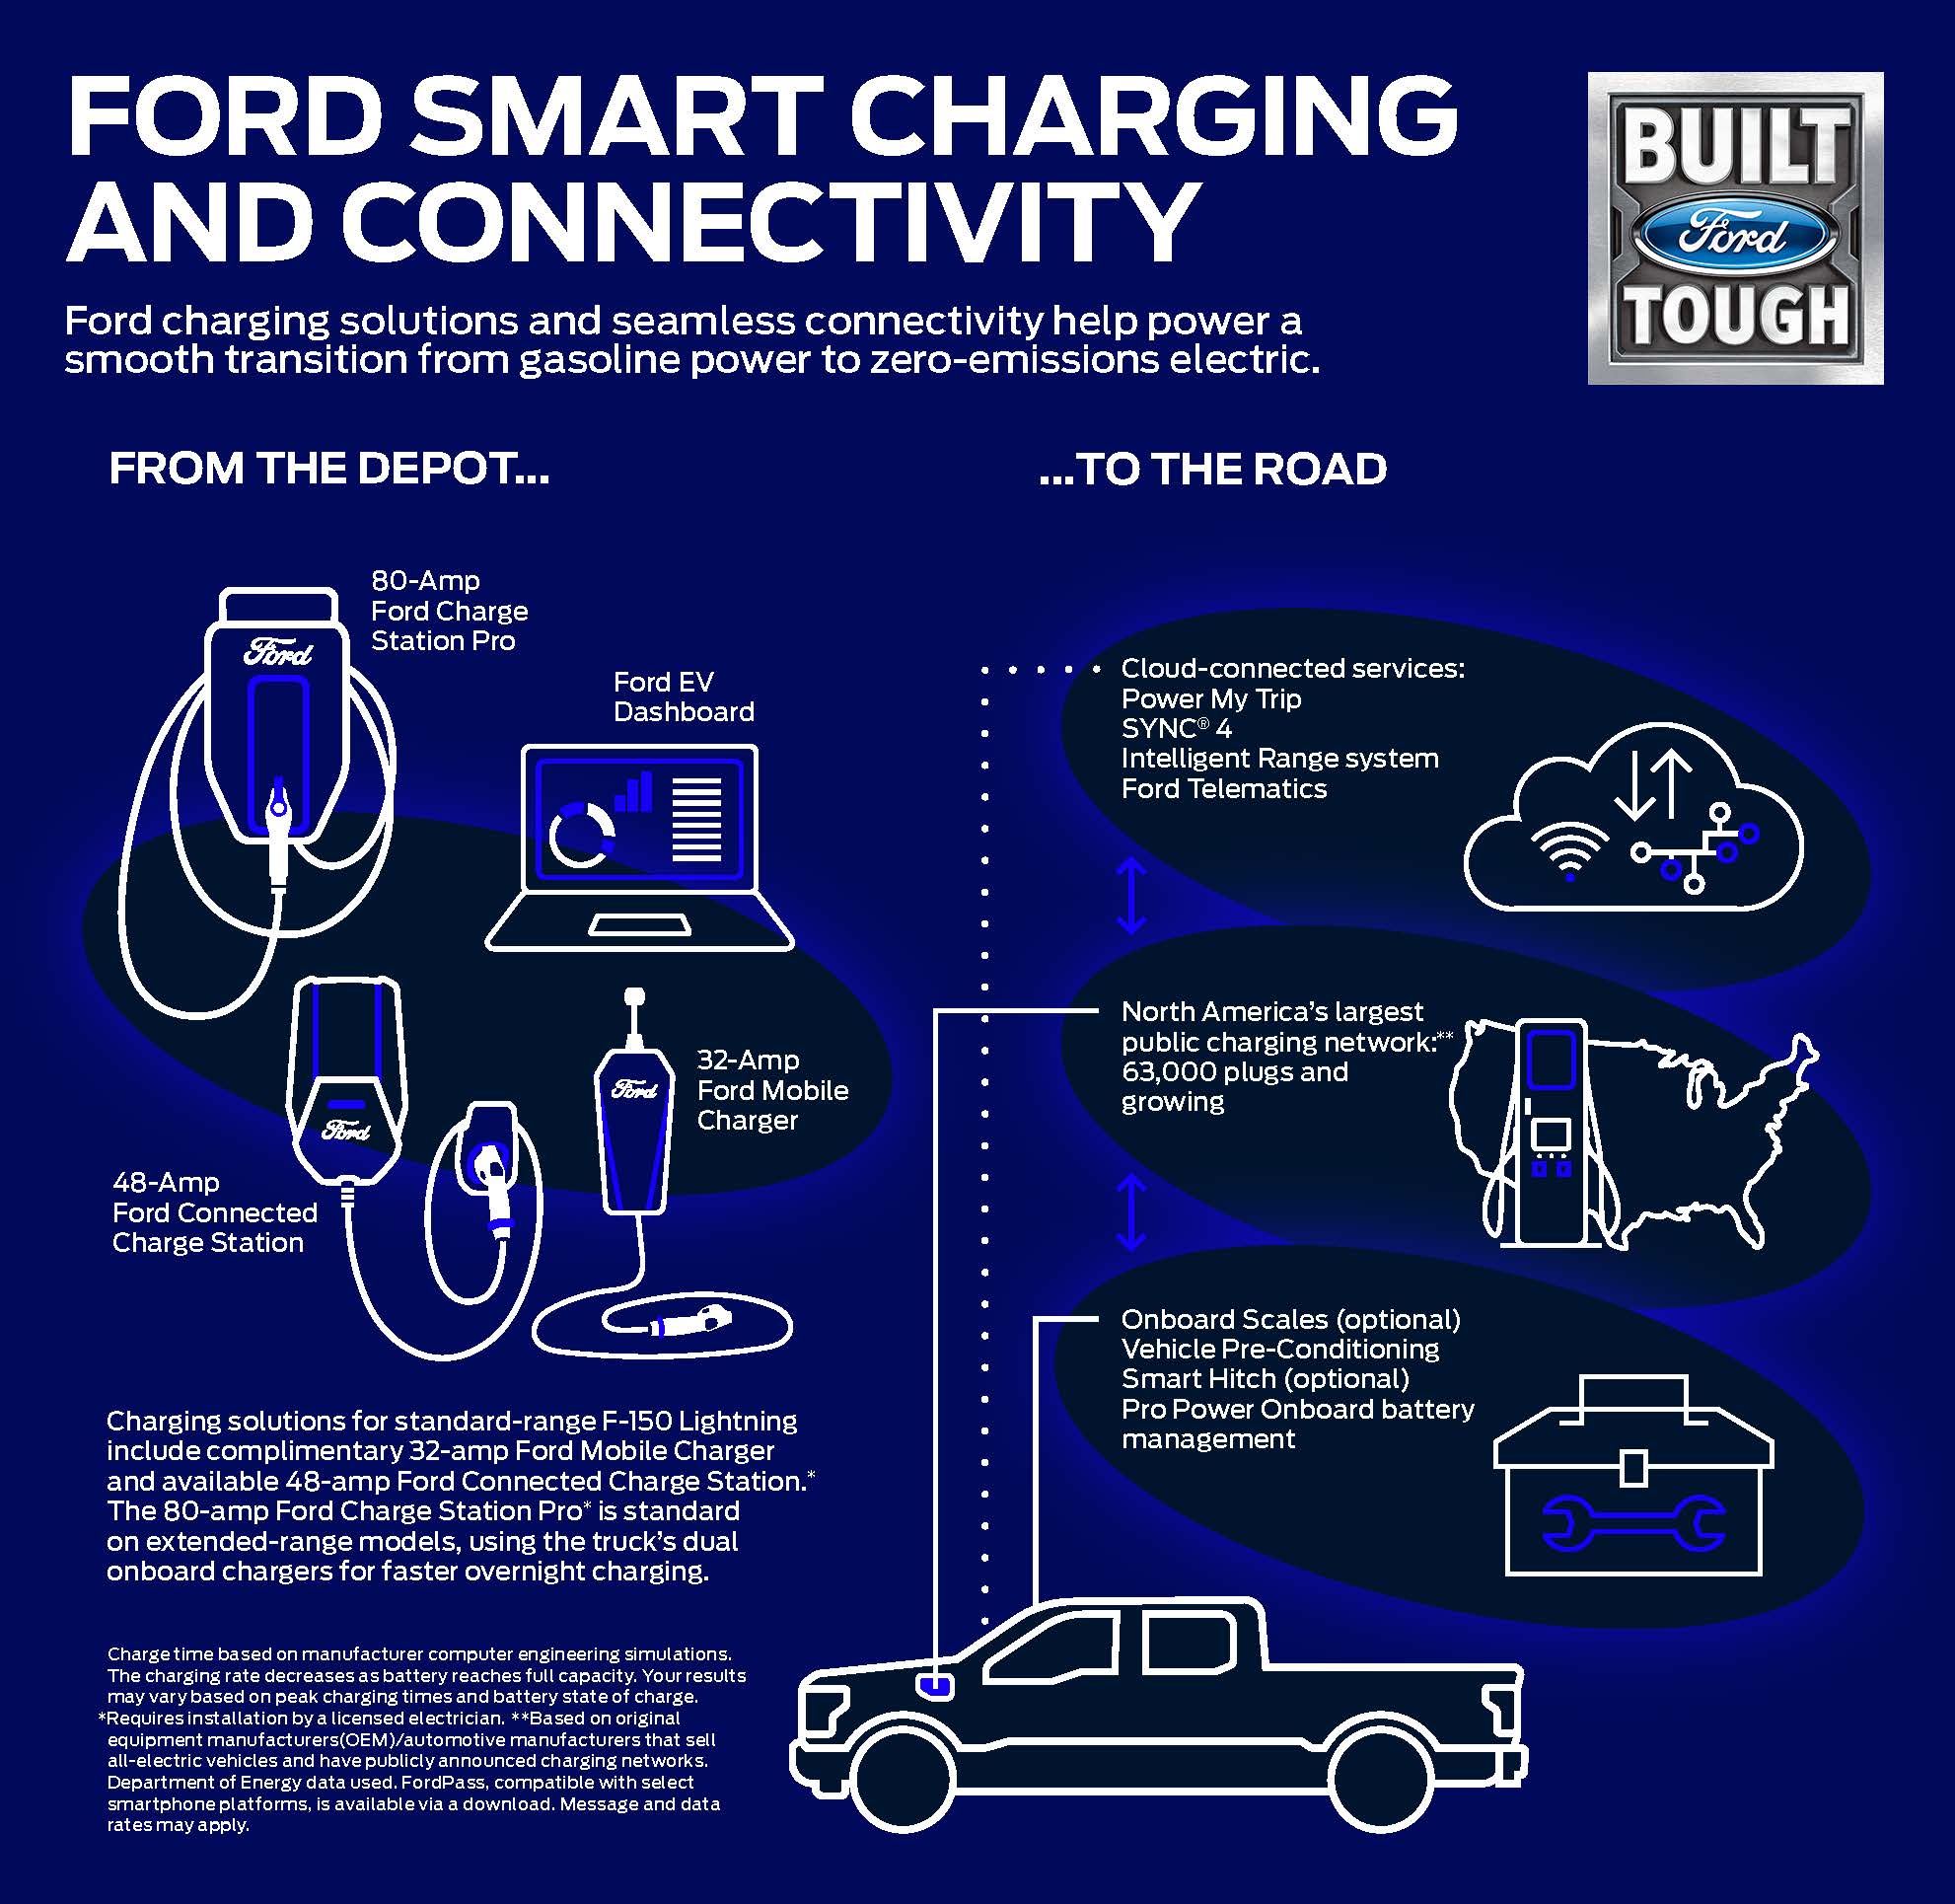 Ford Connected Charge Station